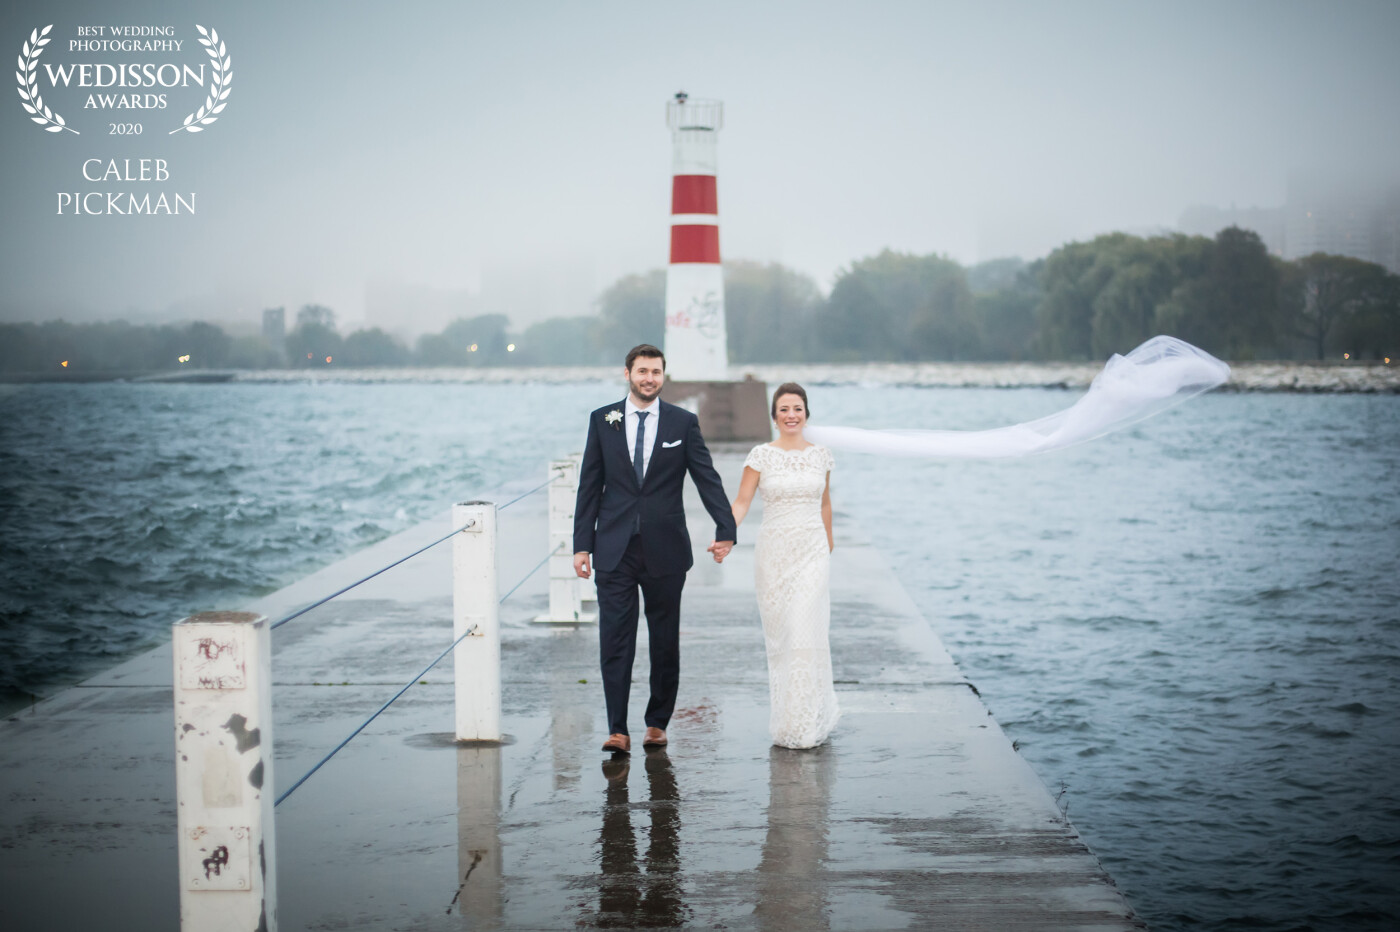 A rainy day wedding would not stop this couple from capturing their love. We shot through the rain, cold, and high winds. At the end of it, all this turned out to be one of my favorite wedding shoots ever!